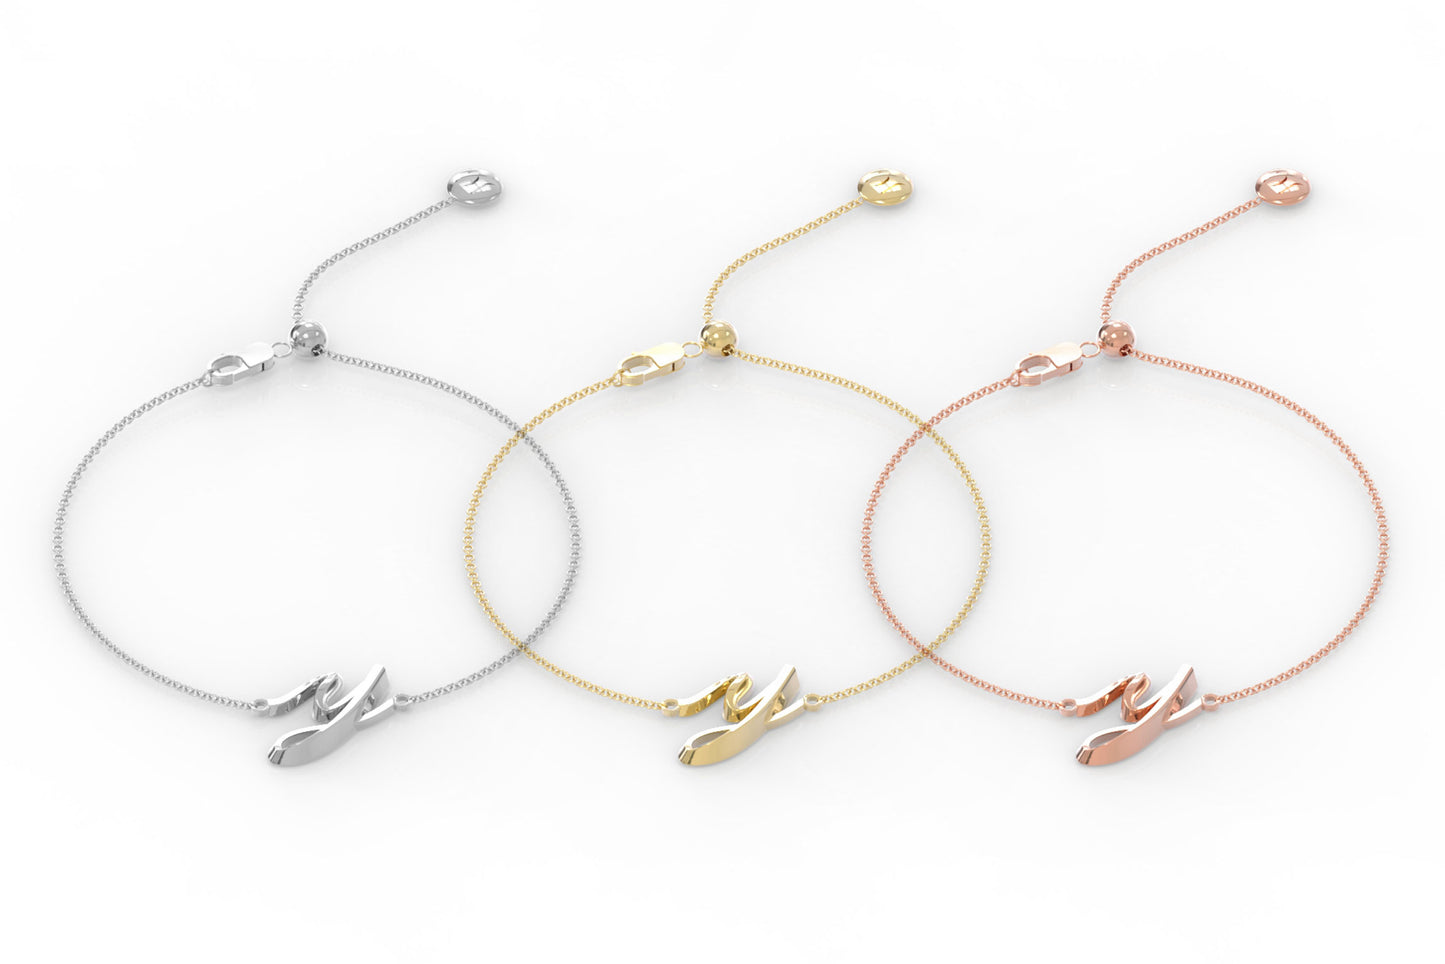 The Love Collect - "Y" Bracelet